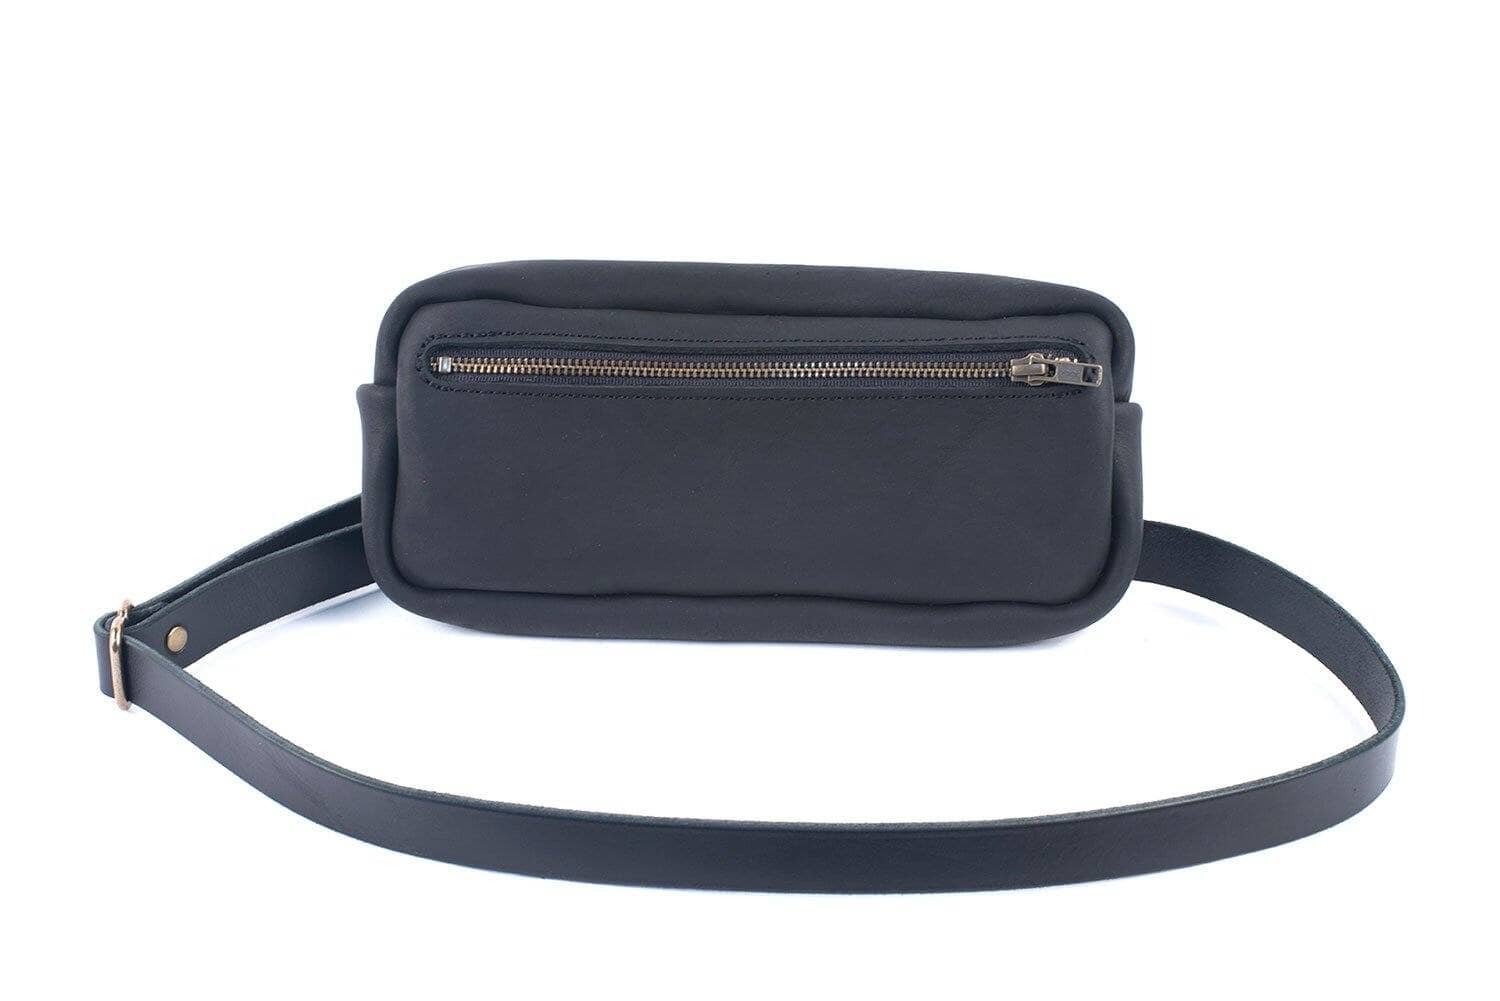 Swanky Leather Waist Pack Travel Bag for Money|Belt| Cards|  Mobile|Documents|Books and Bills Dairy Pouch Cross Side Bags for Men Women.  with Belt Stylish Waist Luggage Accessories with Trust, Brown : Amazon.in:  Bags,